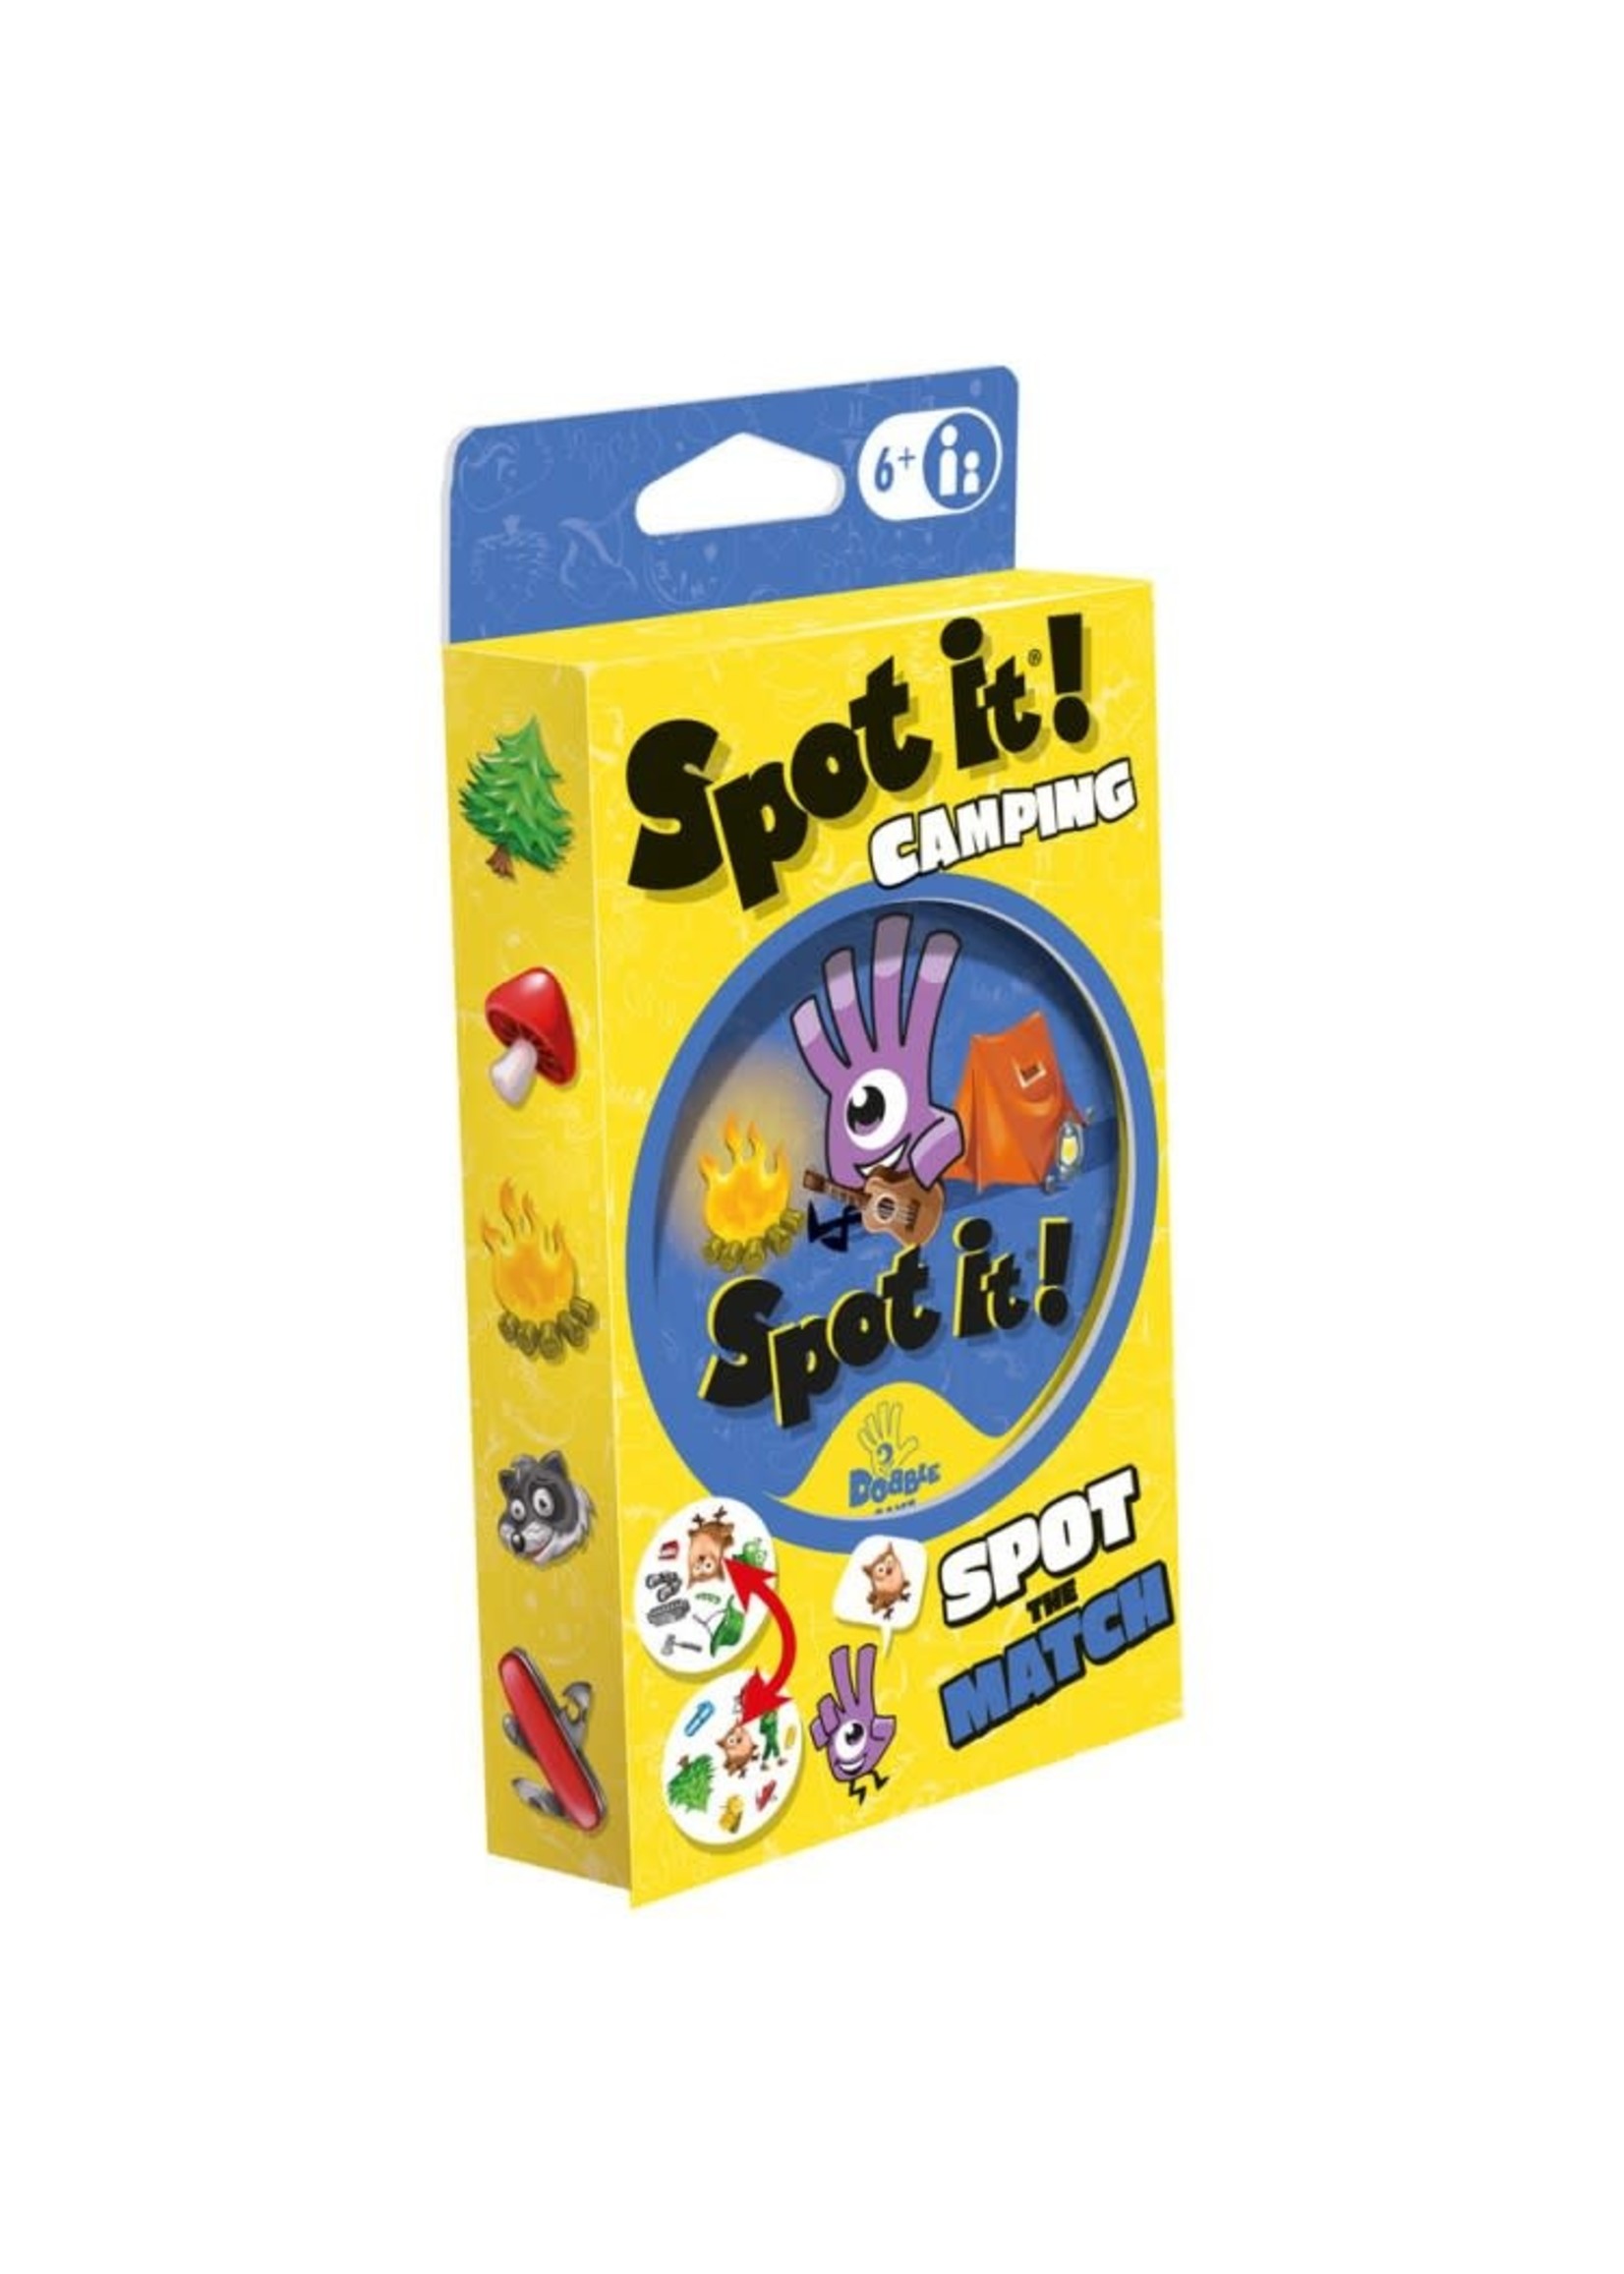 Asmodee Spot it! Camping (Eco-Blister)